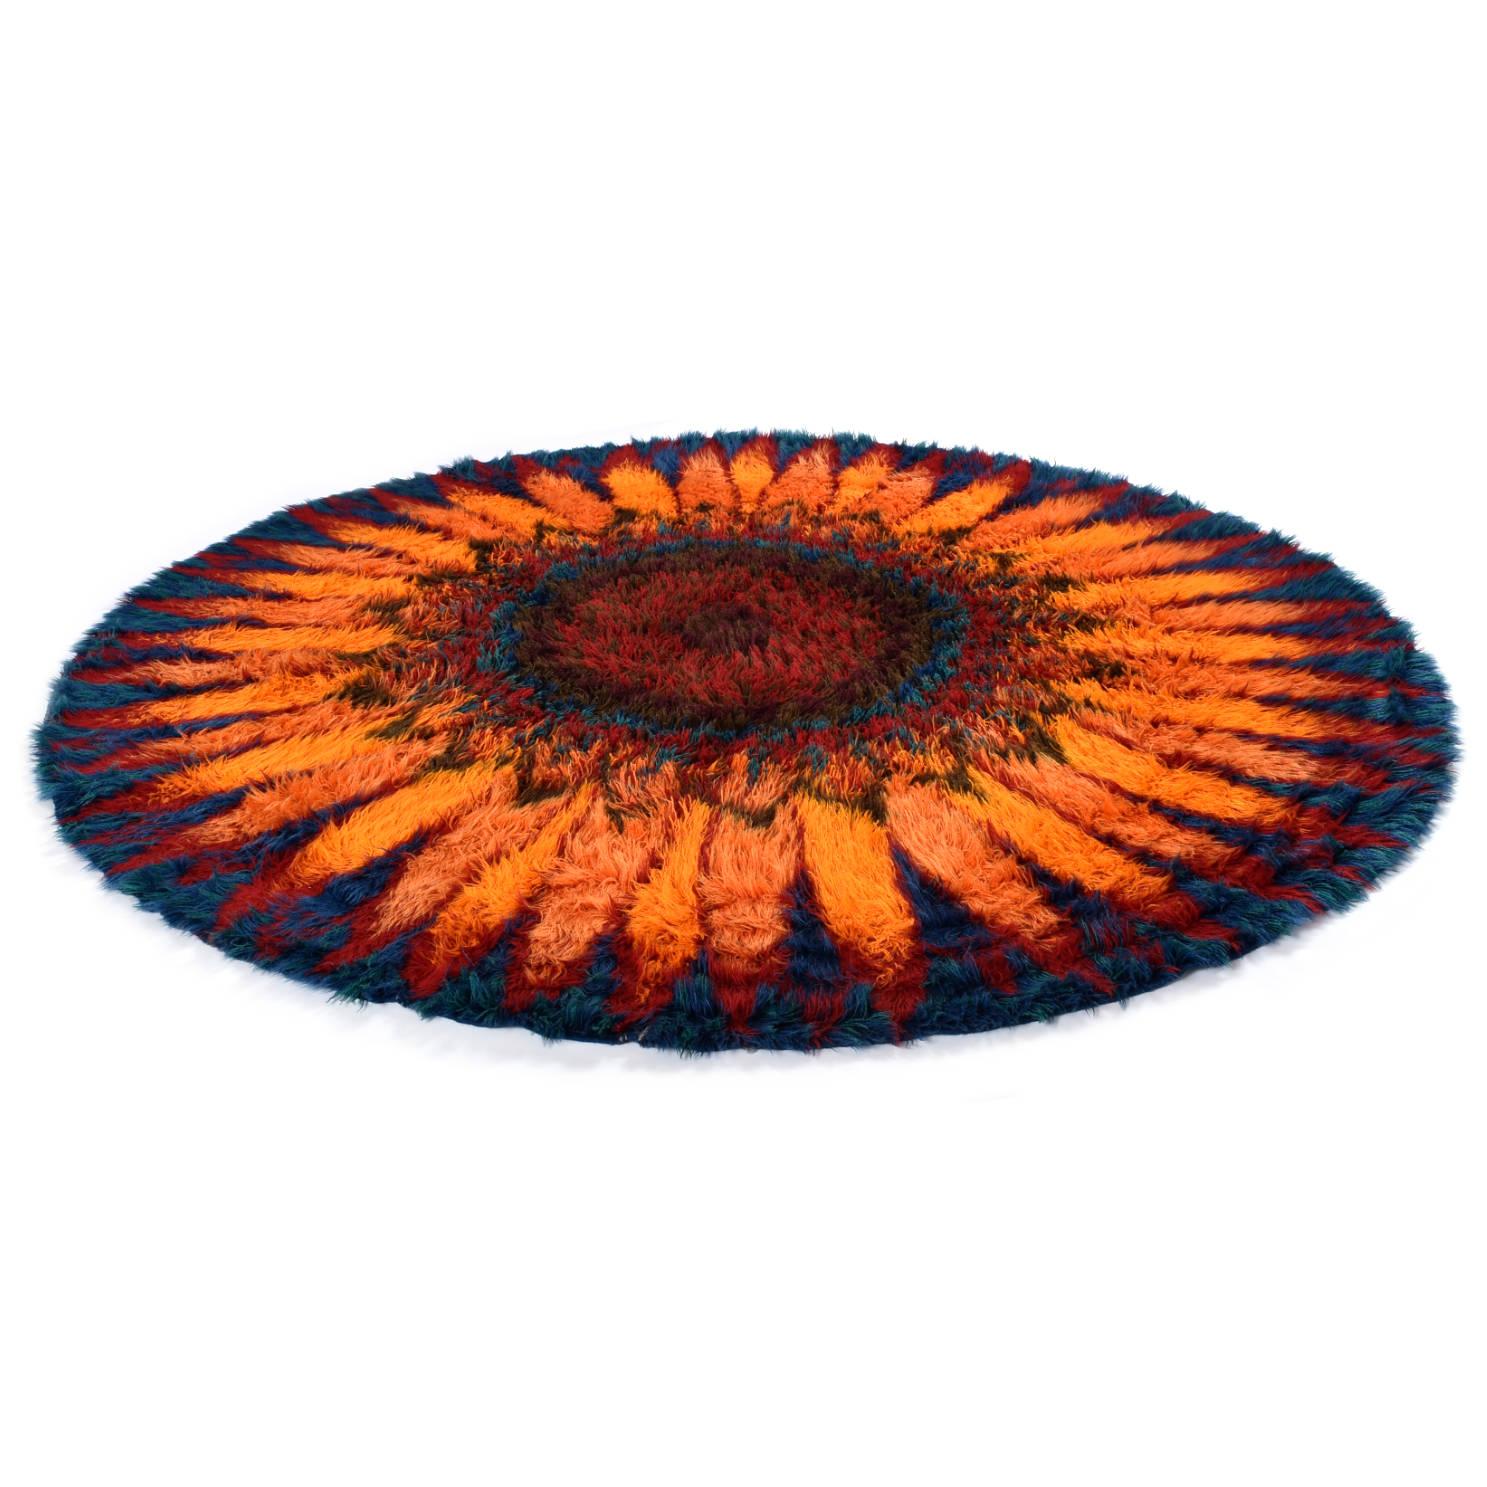 Astoundingly large round Scandinavian Rya rug. The rug is slightly oblong and measures 100